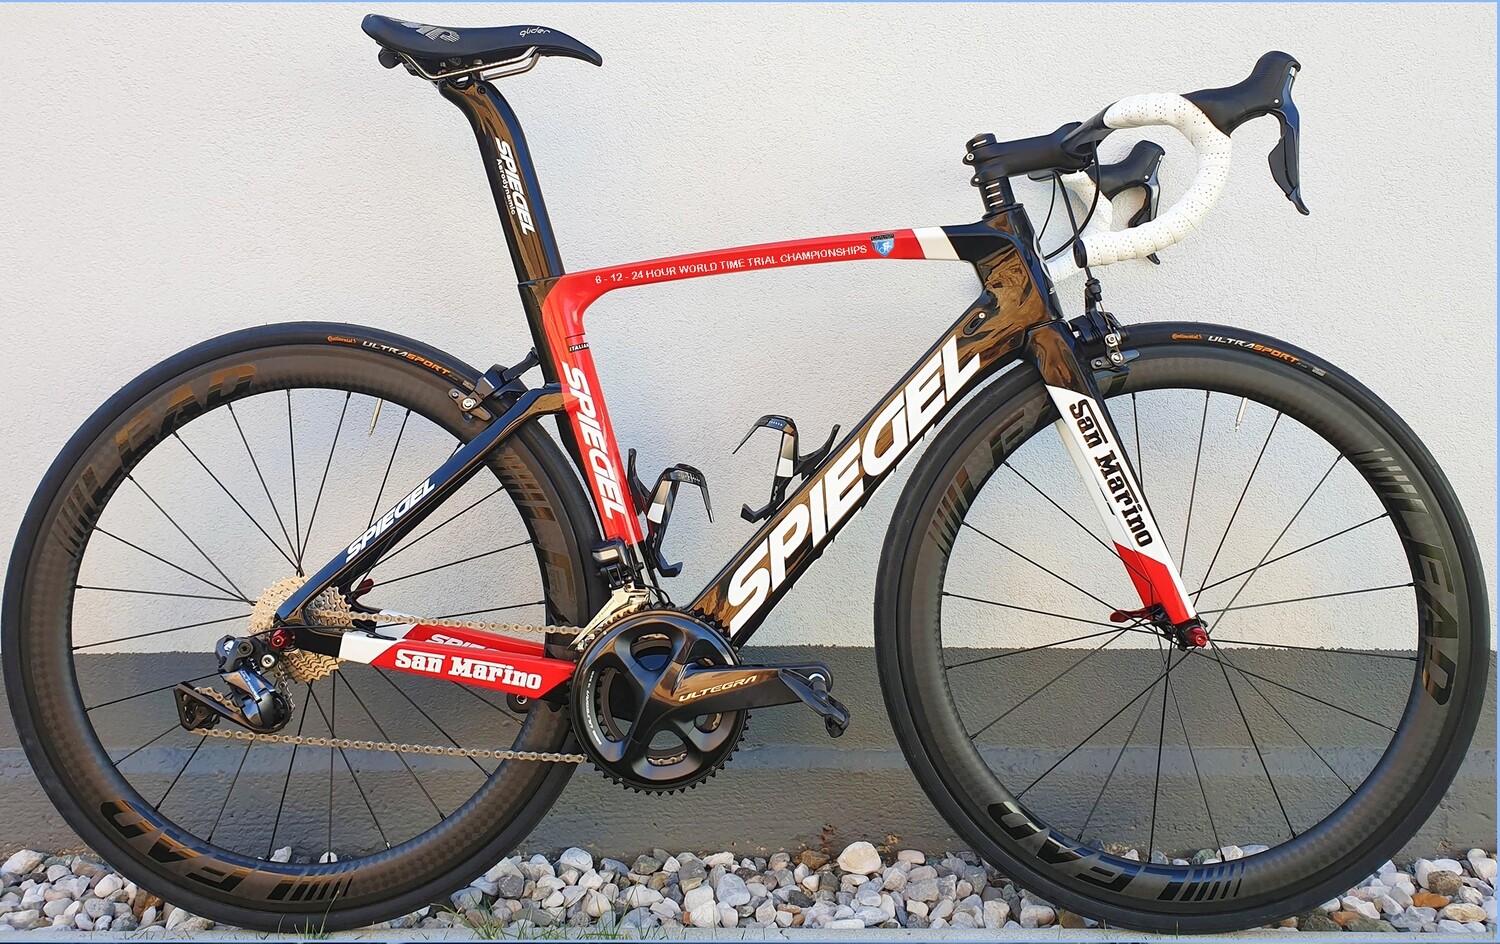 WTTC - Spiegel San Marino With Personalized CATEGORY WINNER Graphics - Disc Brake Compatible  (USA Shipping)